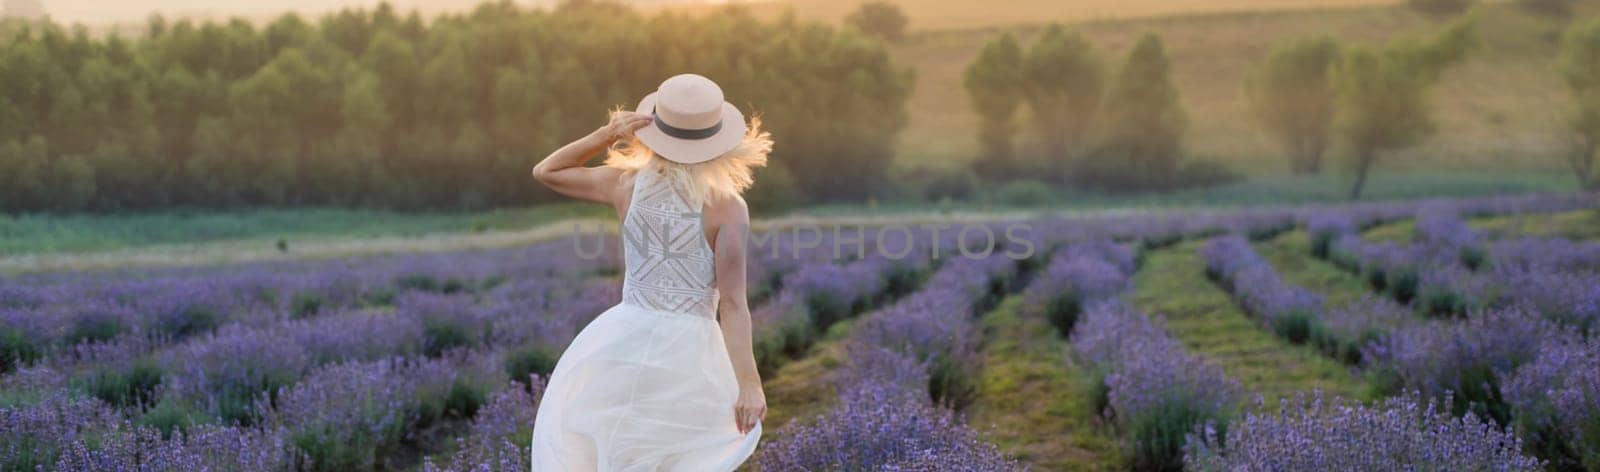 Beautiful young woman wearing a white dress walking in the middle of a lavender field in bloom.